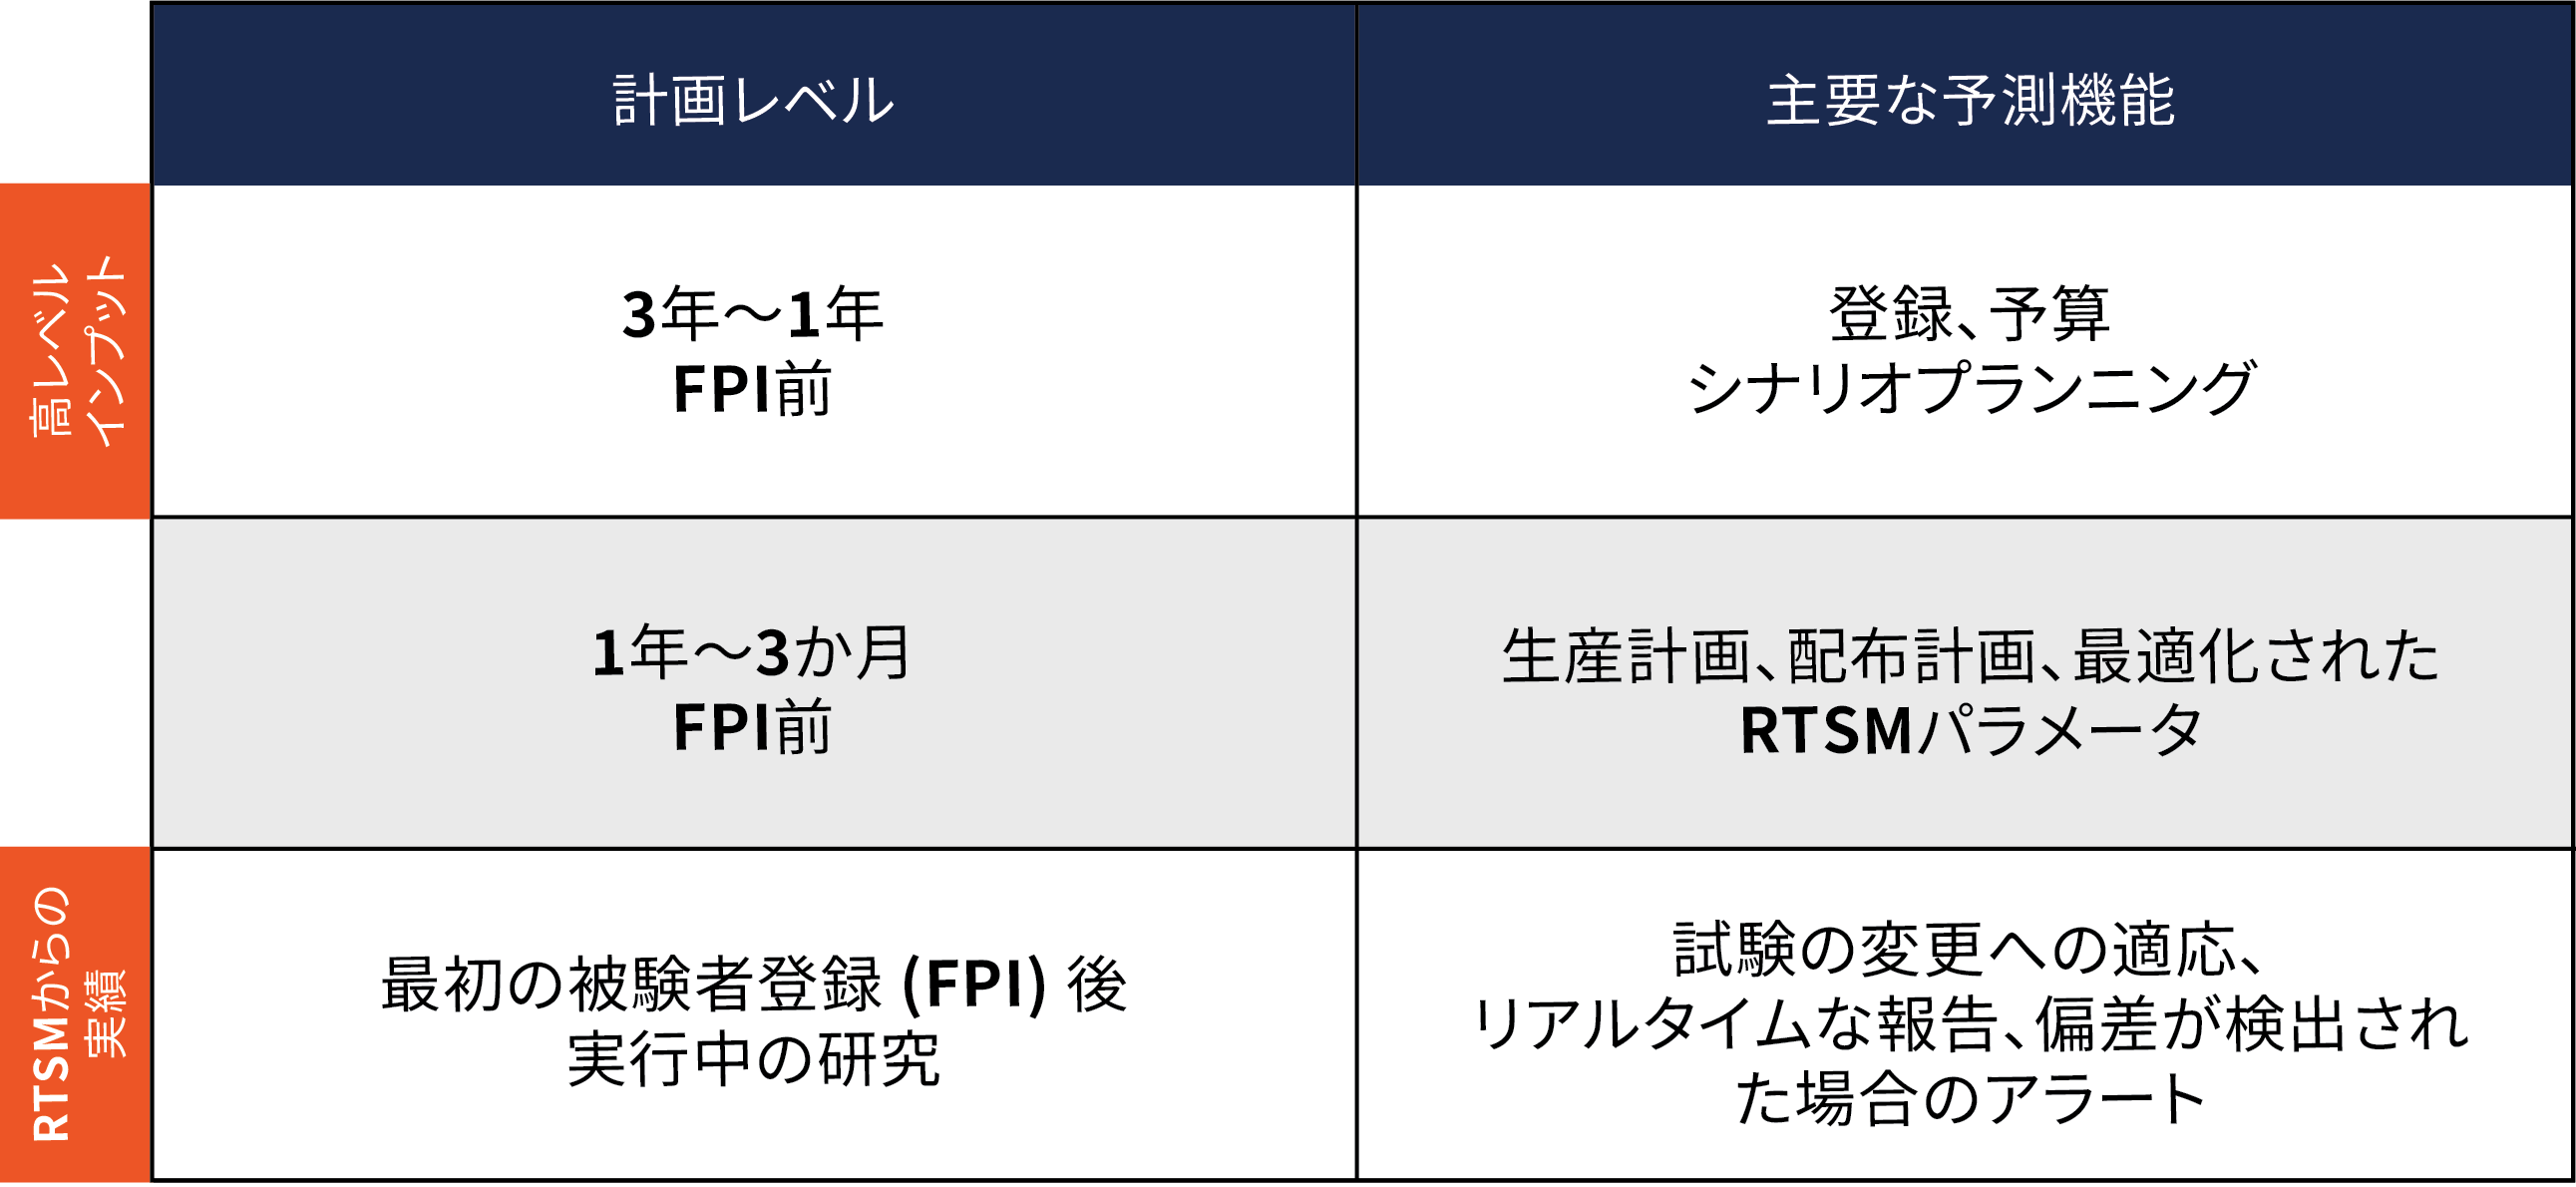 4C-forecasting-based-on-available-information-JP